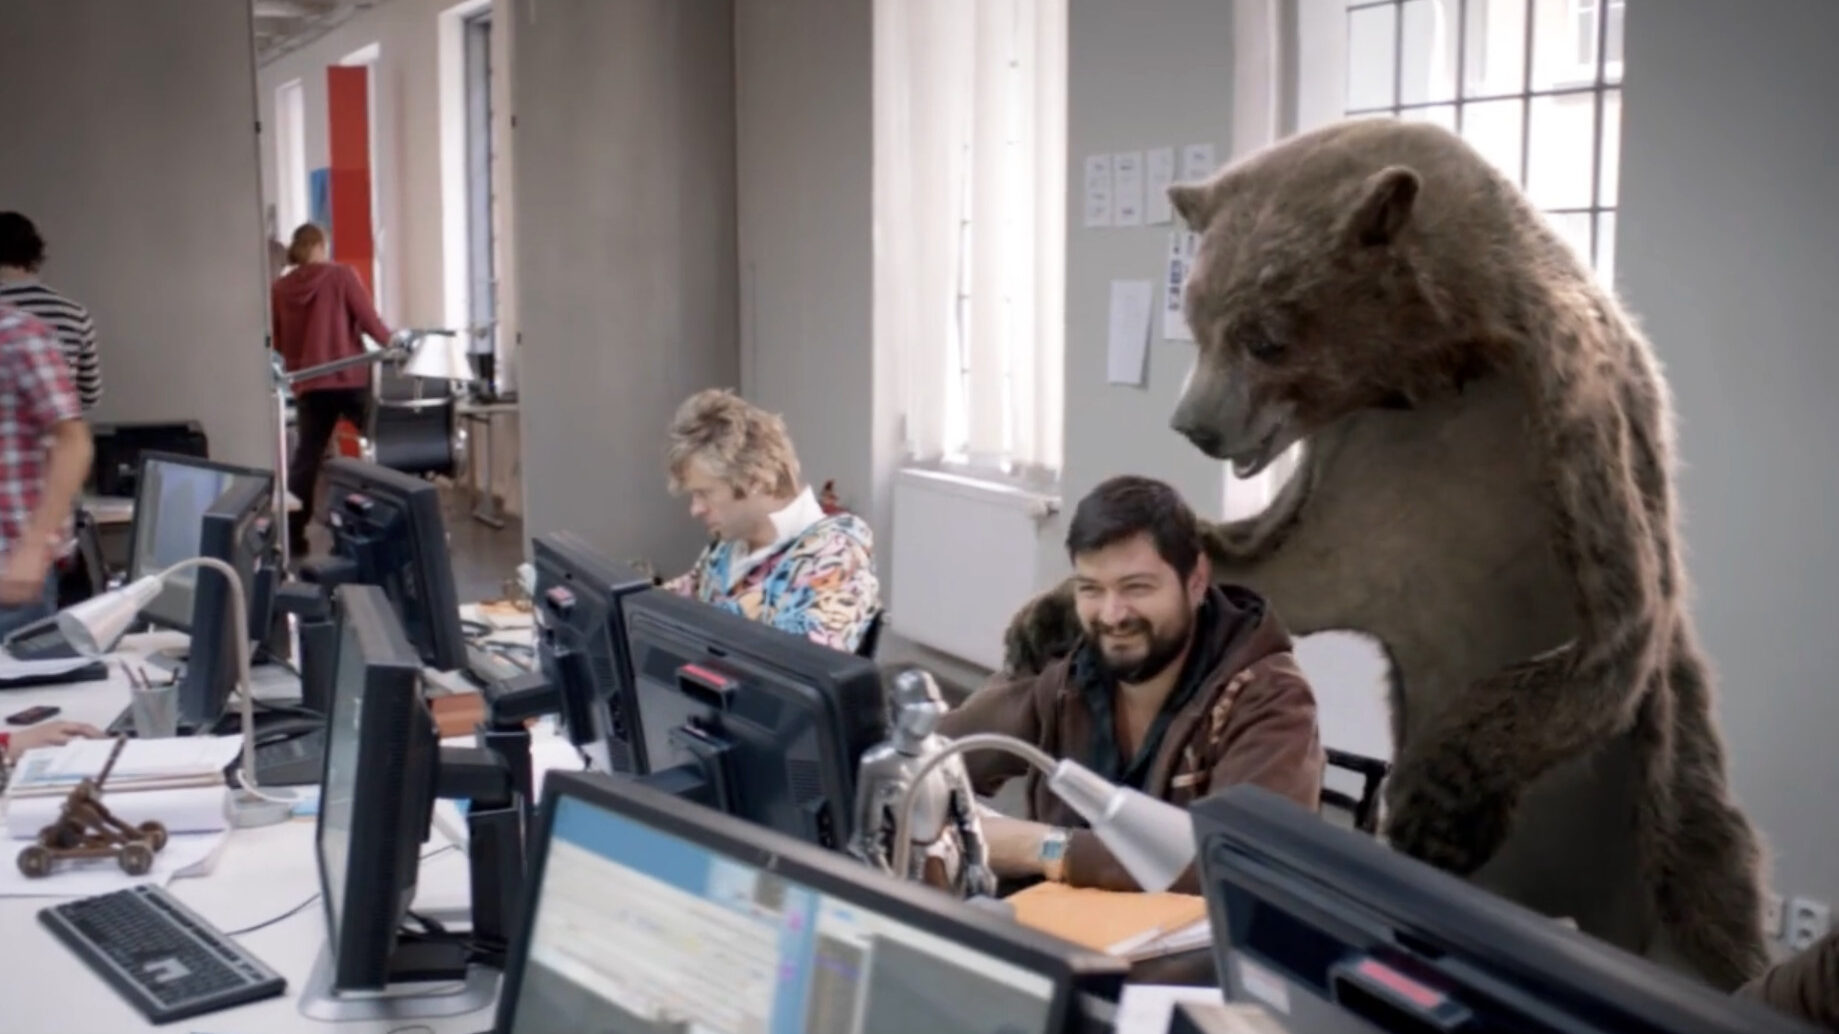 canal + 'the bear', a bearskin rug film director has his arm around a video editor in an office.